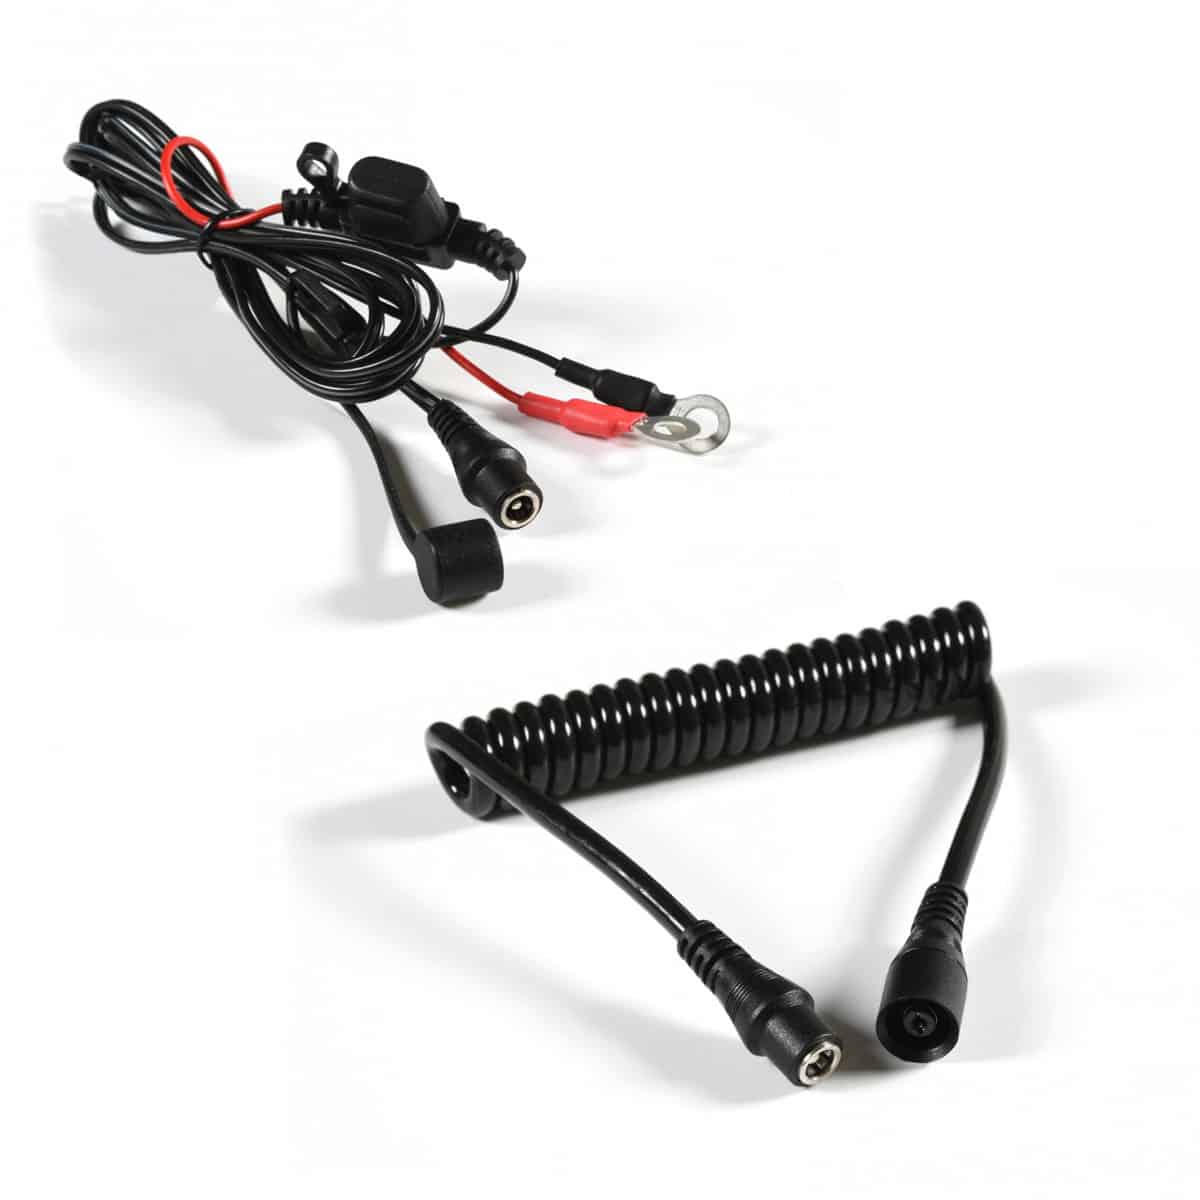 The cables required to connect your Macna heated jacket to your motorcycle battery